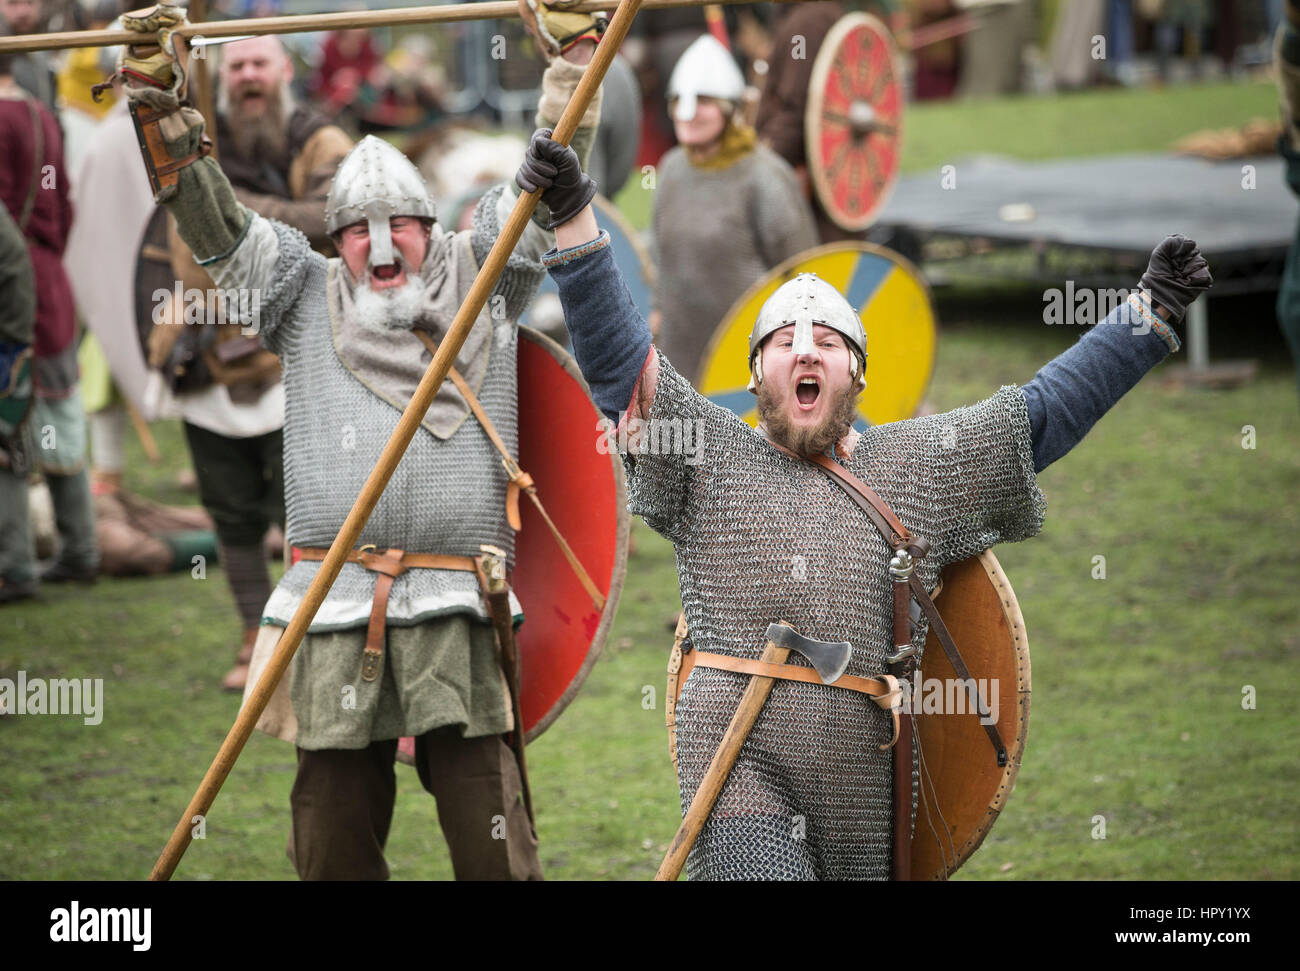 Viking re-enactors take part in a mock battle during the JORVIK Viking Festival in York, a week-long celebration of the last Viking king in the city, Eric Bloodaxe. Stock Photo